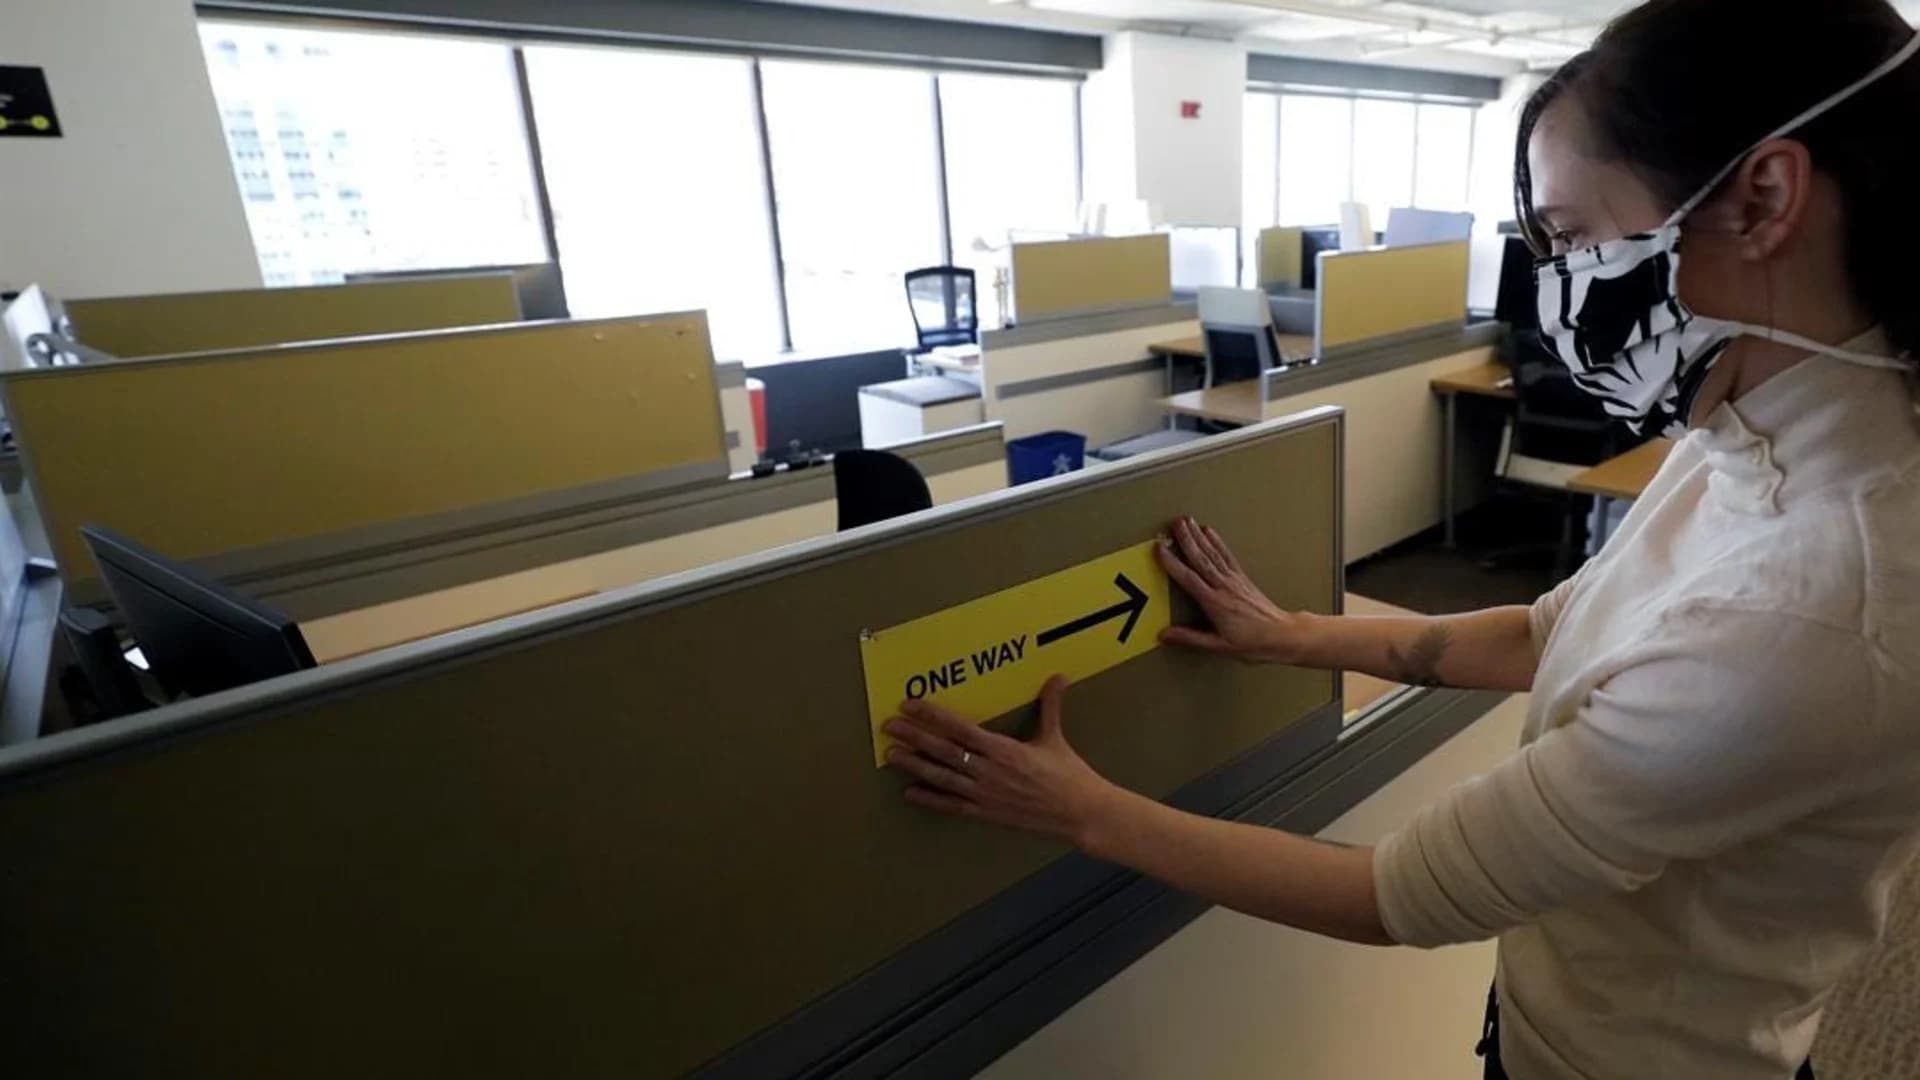 Taller cubicles, one-way aisles: Returning office workers face adjustments amid pandemic